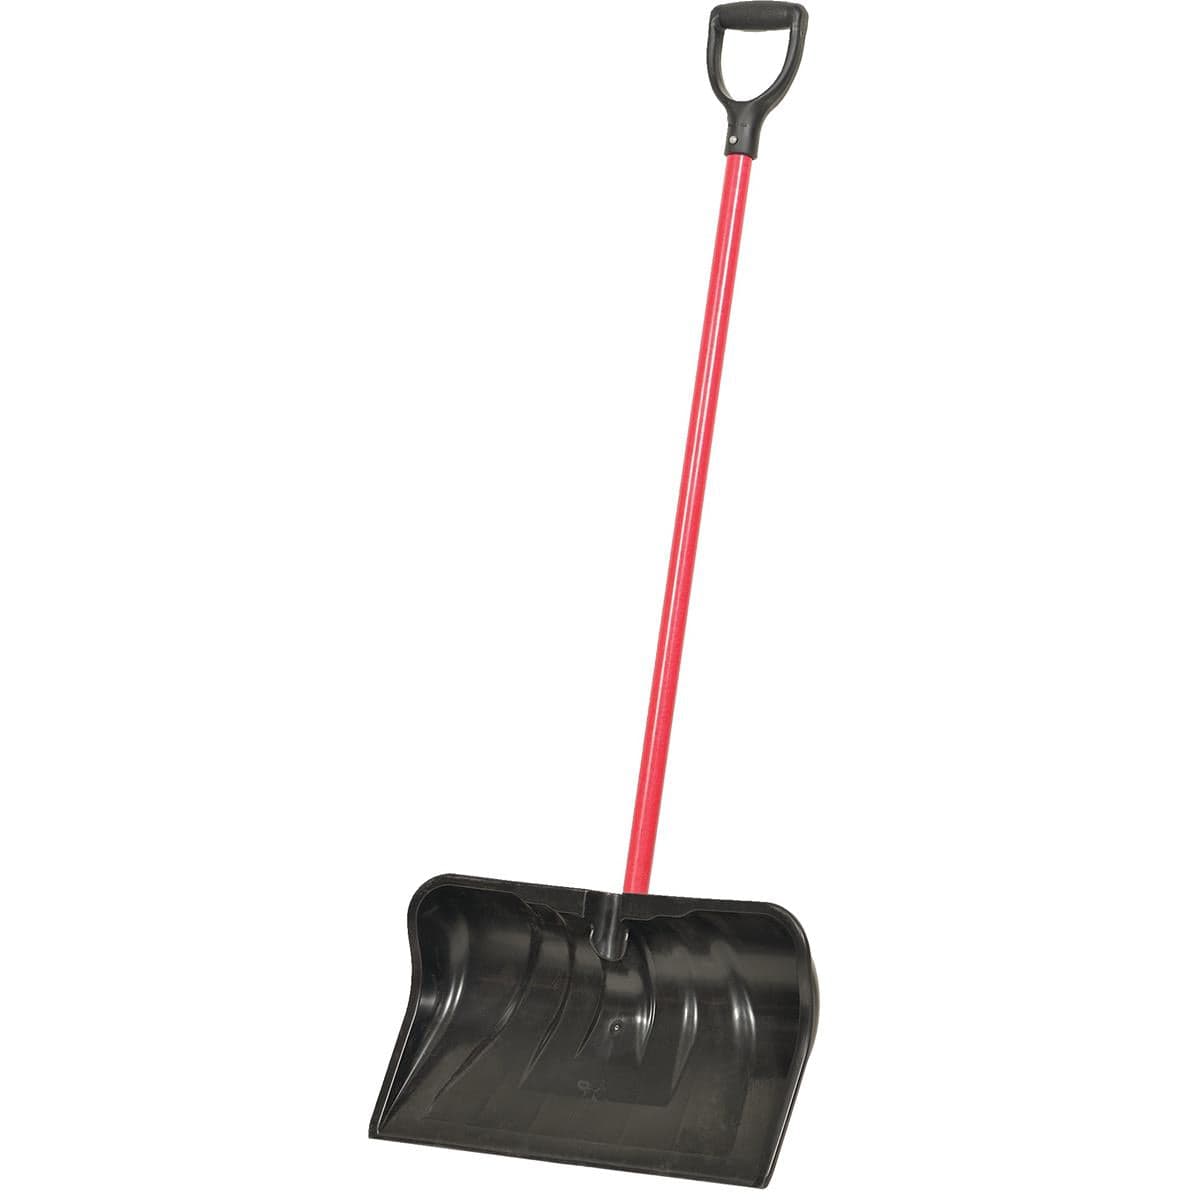 Combination Shovel and Snow Pusher